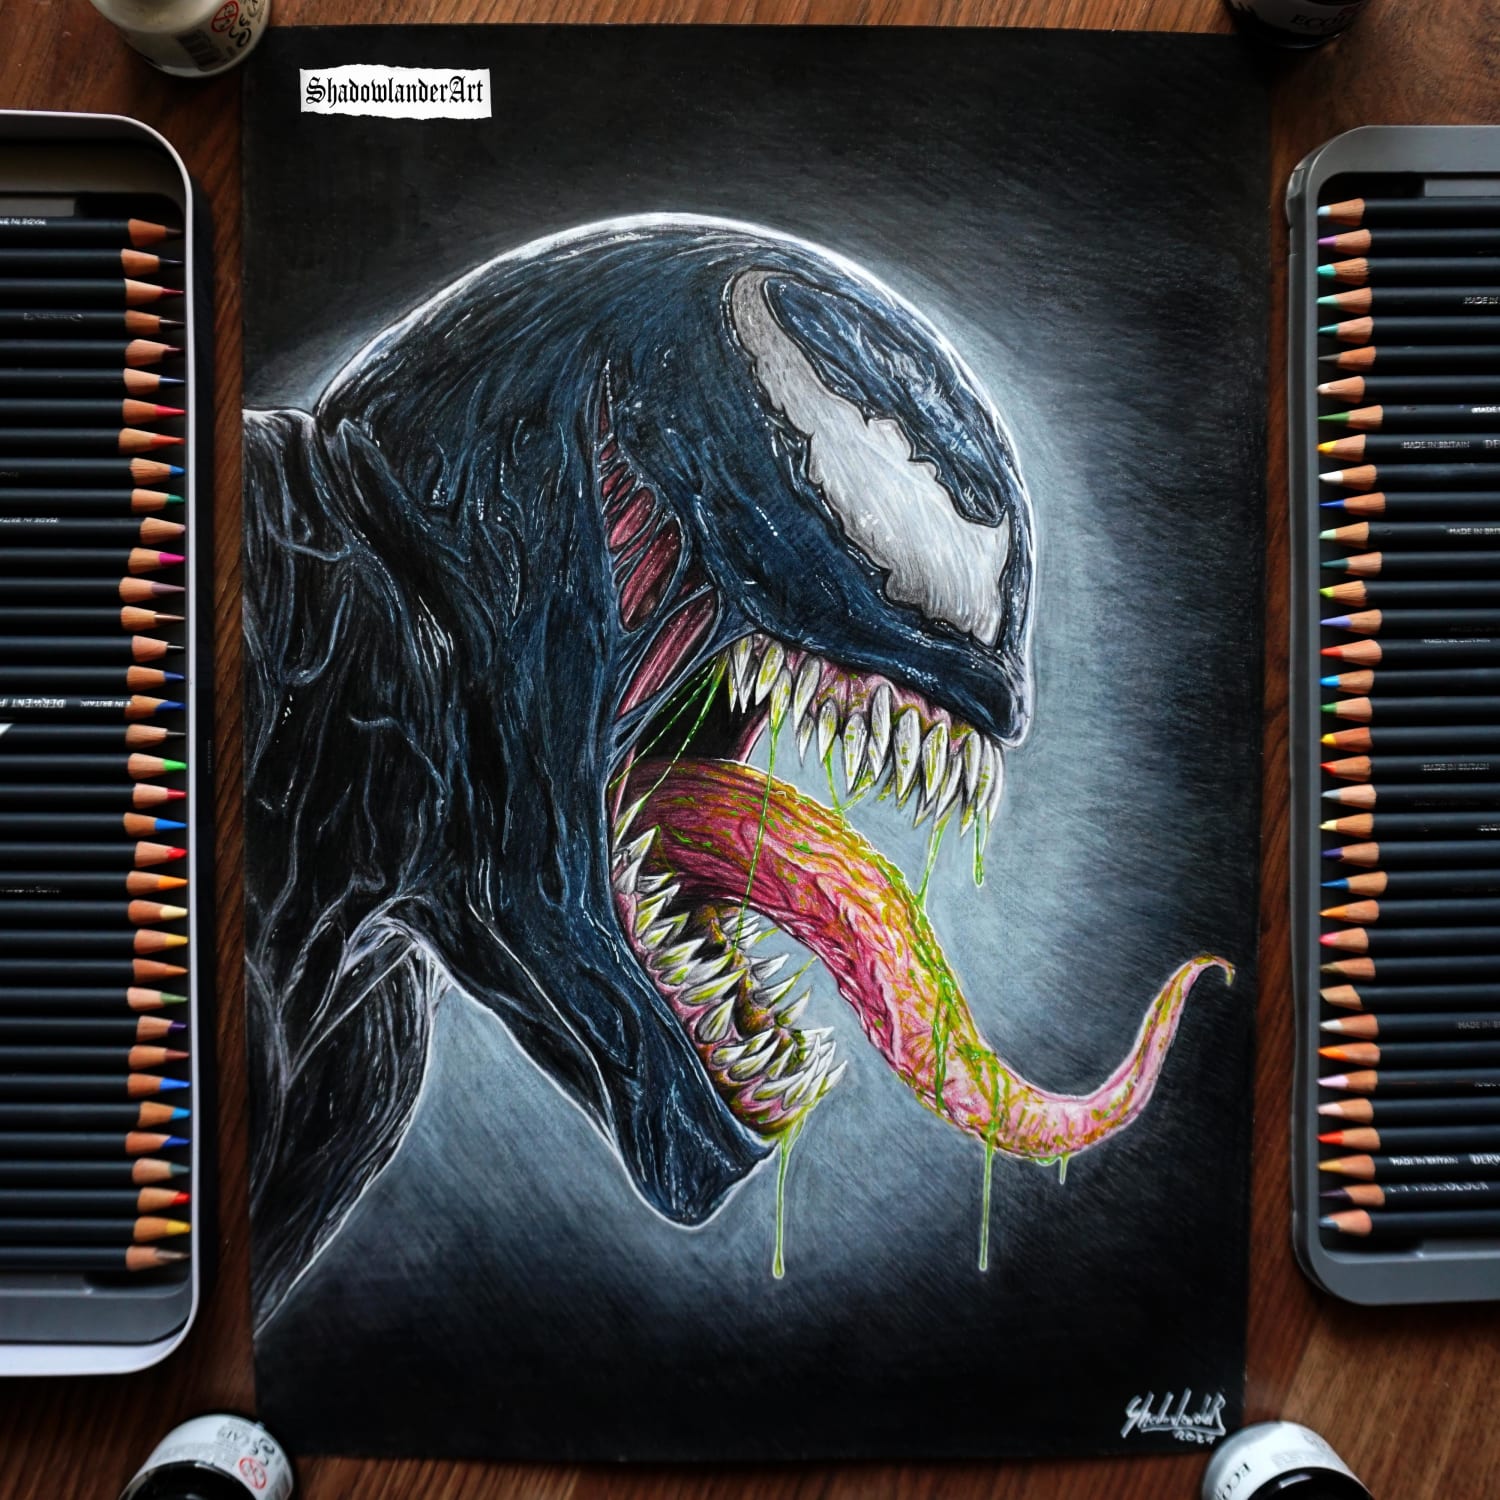 My Venomdrawing. Made with colored pencils. @shadowlander_art